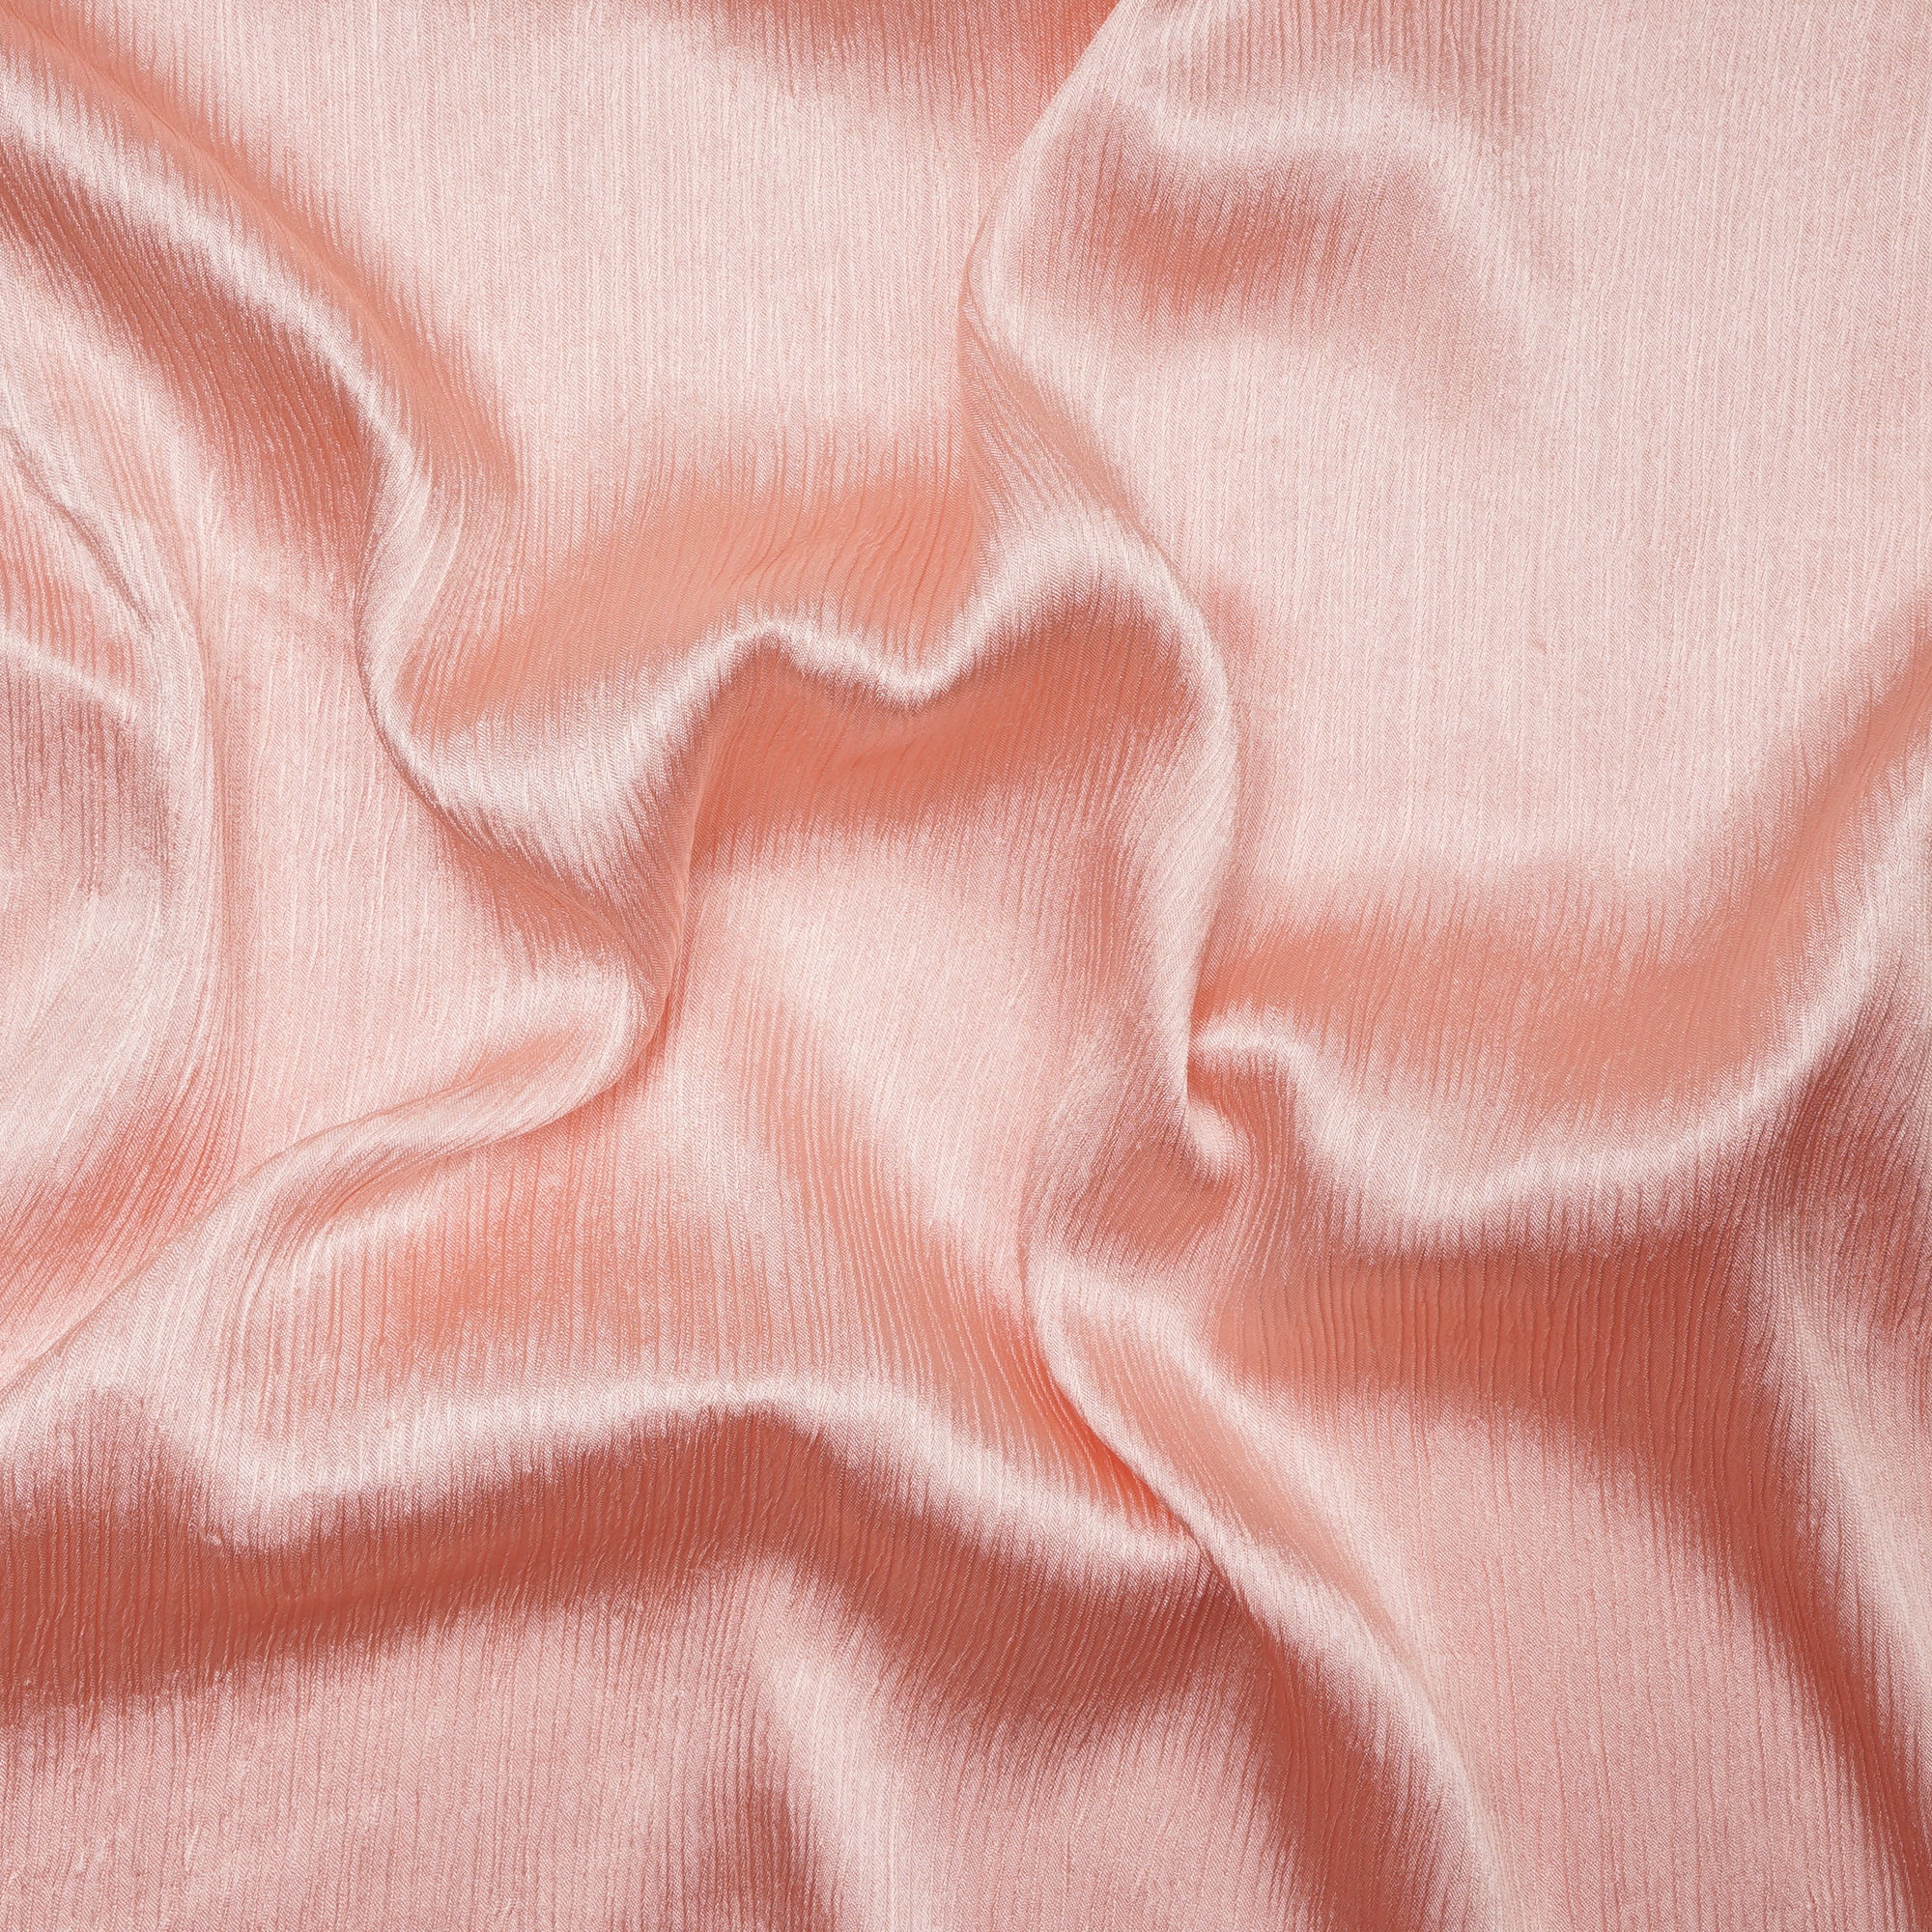 Peach Imported Crinkled Satin Fabric (60" Wide)